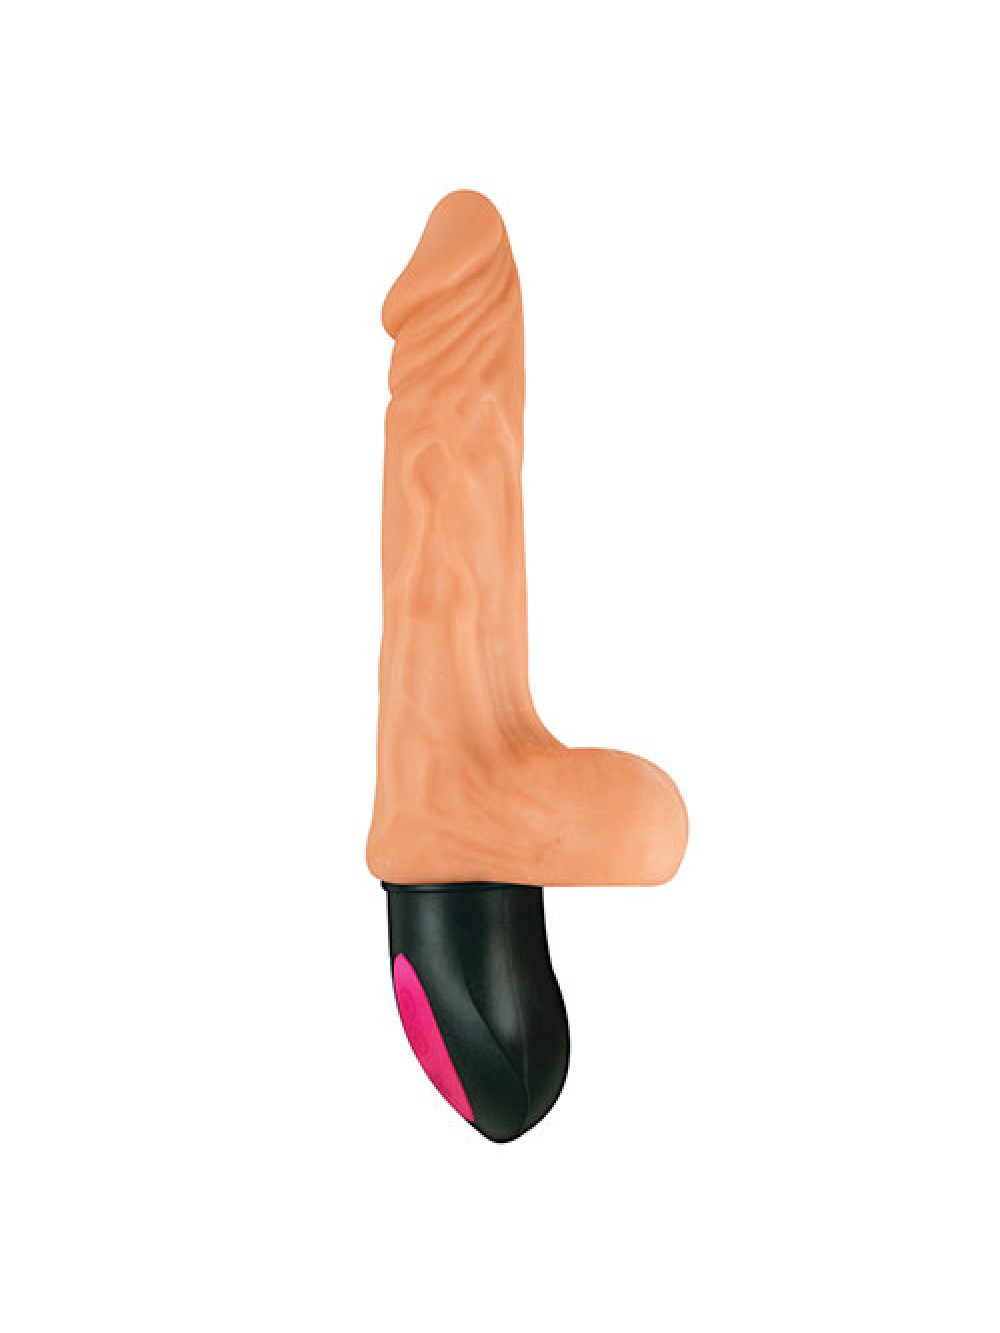 RECHARGEABLE REALSKIN WITH SCROTUM HOT COCK VIBRATOR 2